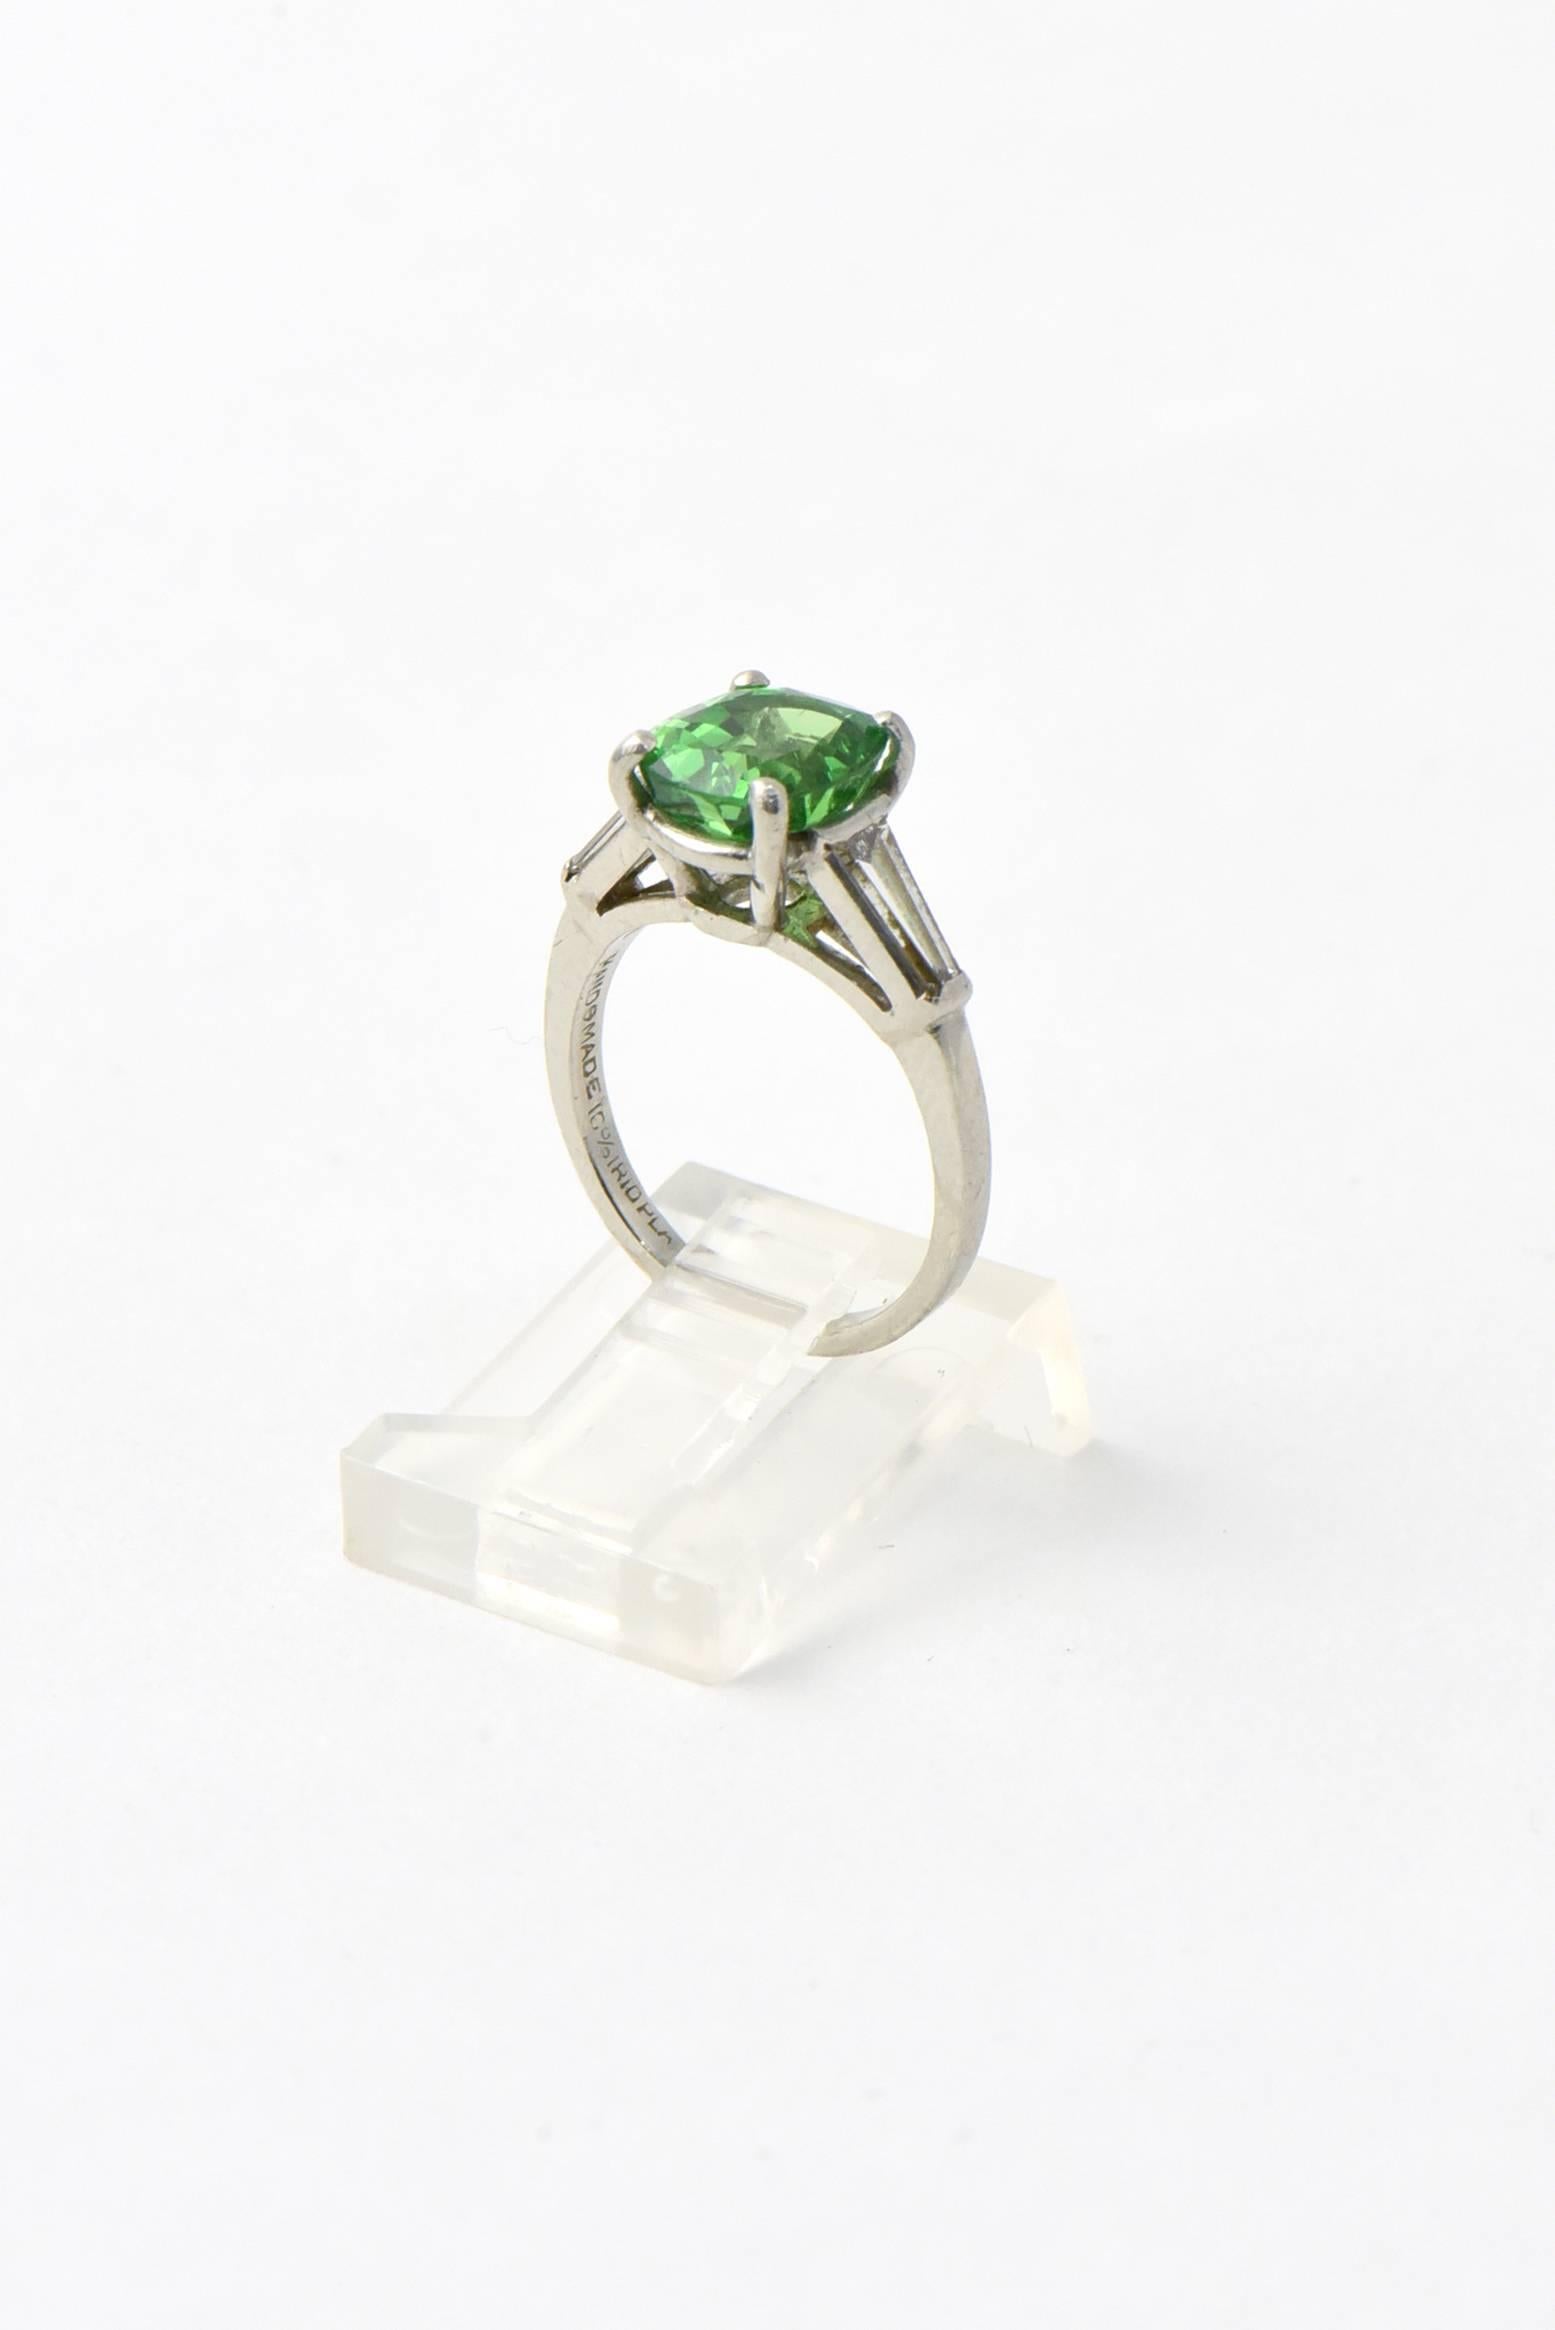 Stunning GIA certed natural Tsavorite Garnet mounted in a simple tapered baguette diamond and platinum mounting.  The 2.78 carat tsavorite  2.78 is an gorgeous green transparent color.  

US size 4.5.  It can be sized.